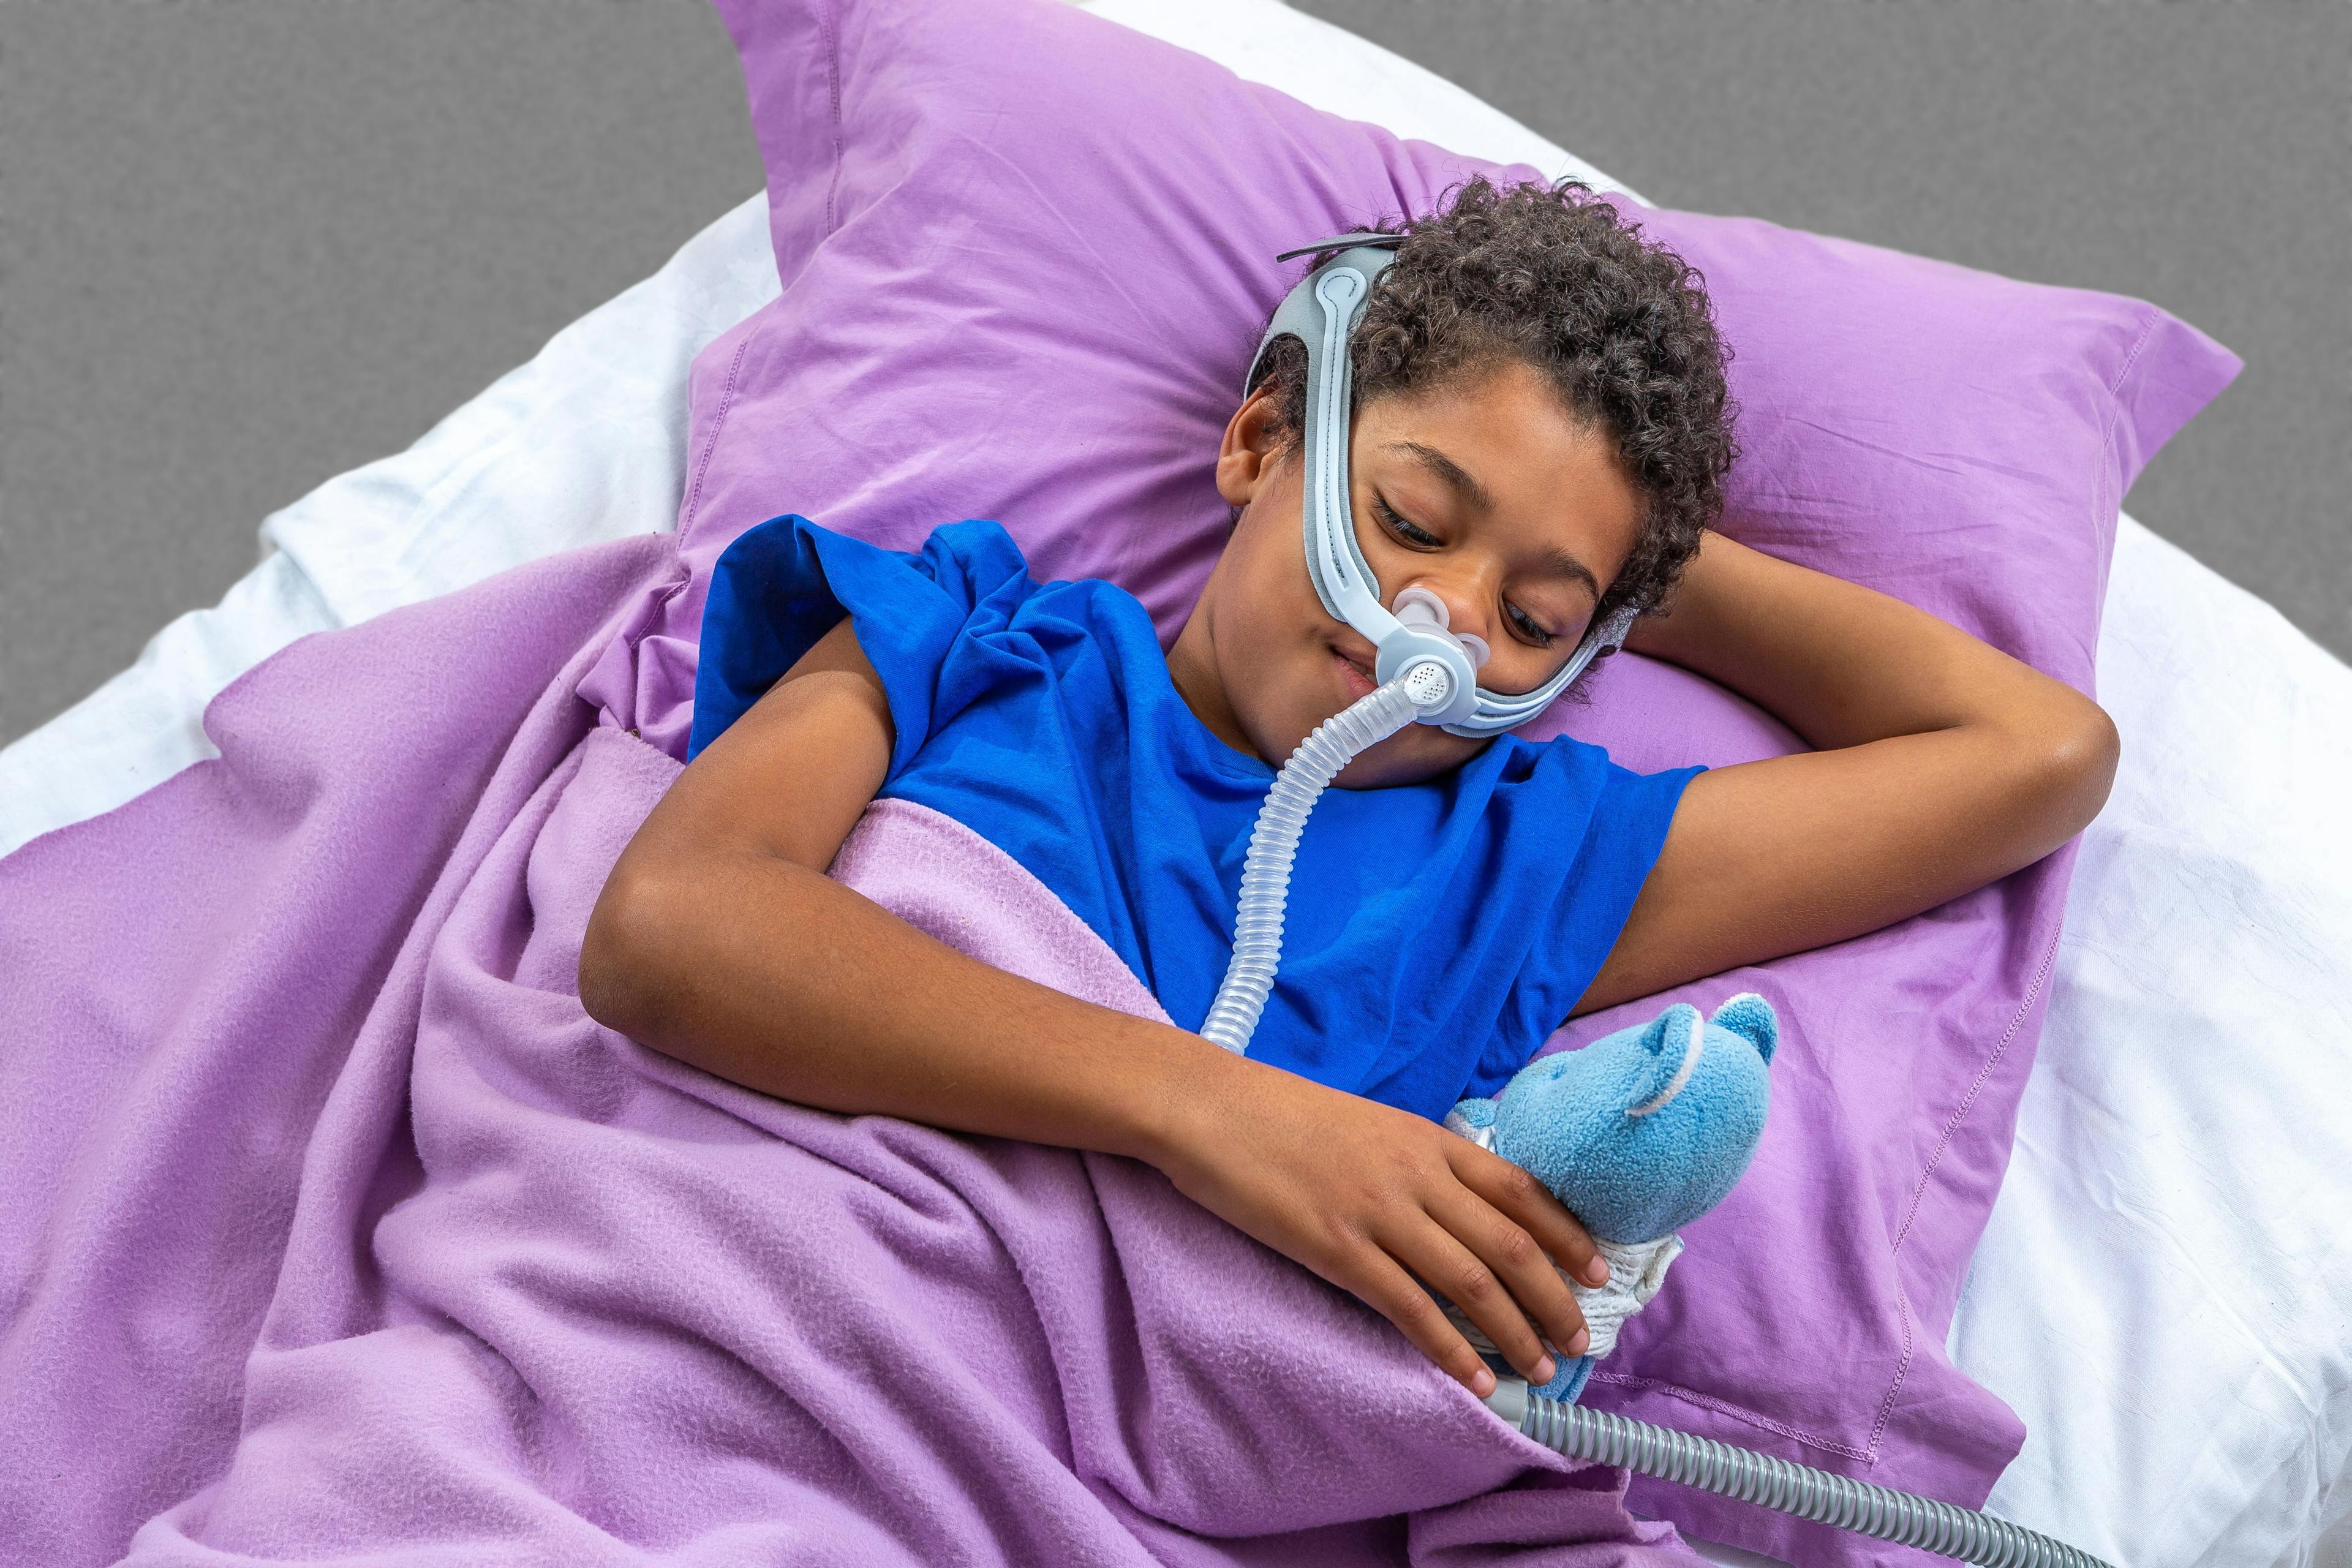 Childhood Insomnia Symptoms Often Persist into Adulthood, Study Finds